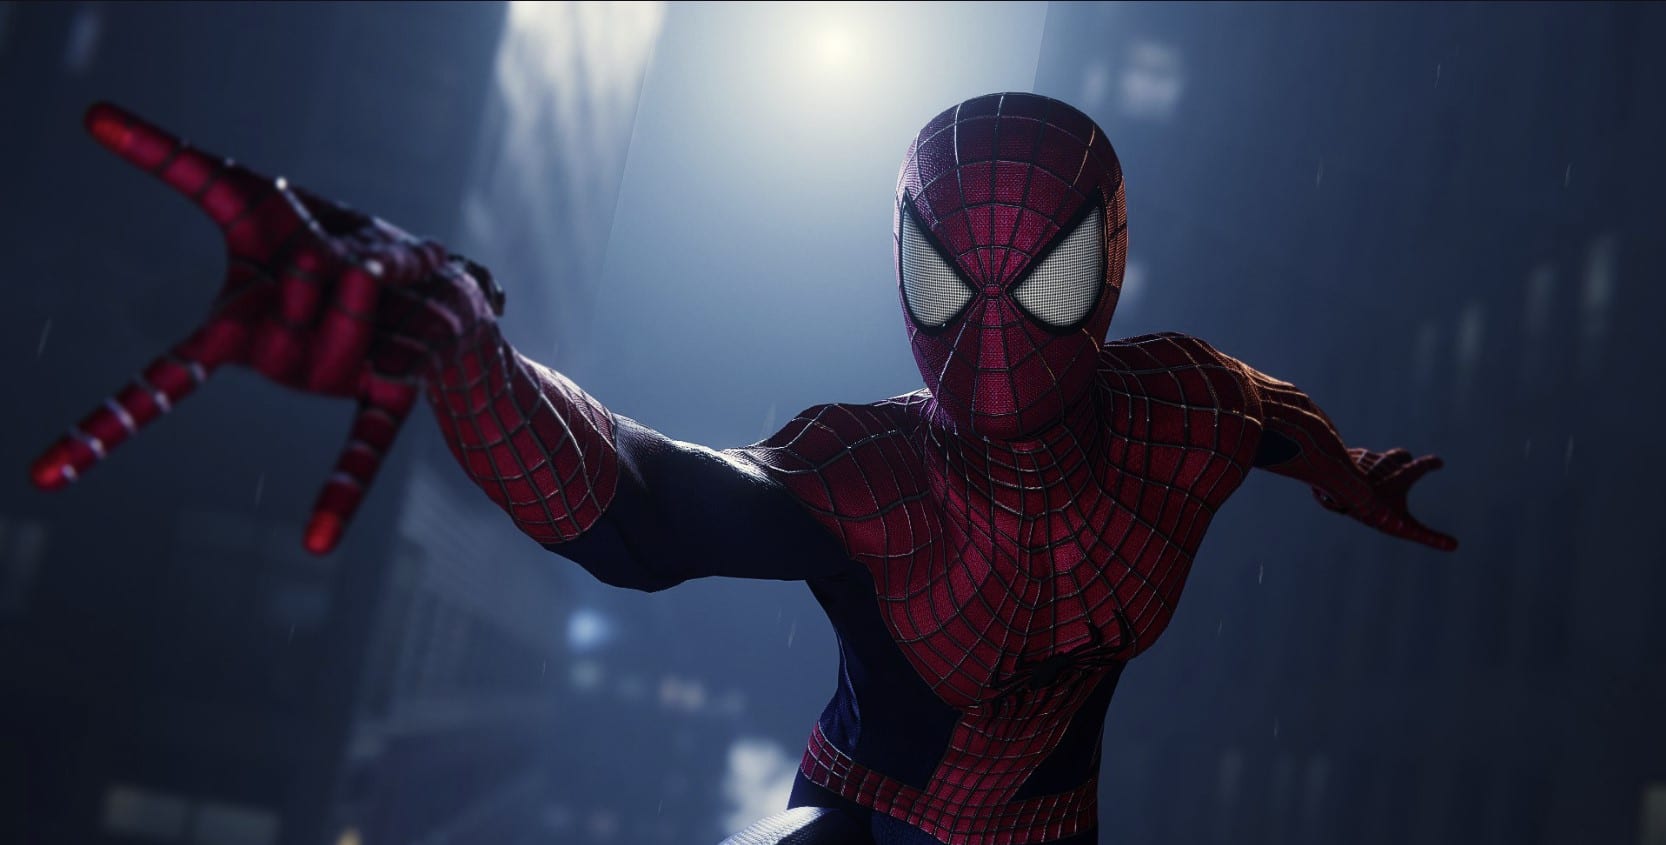 The Amazing Spiderman 2 suits looks great in the game